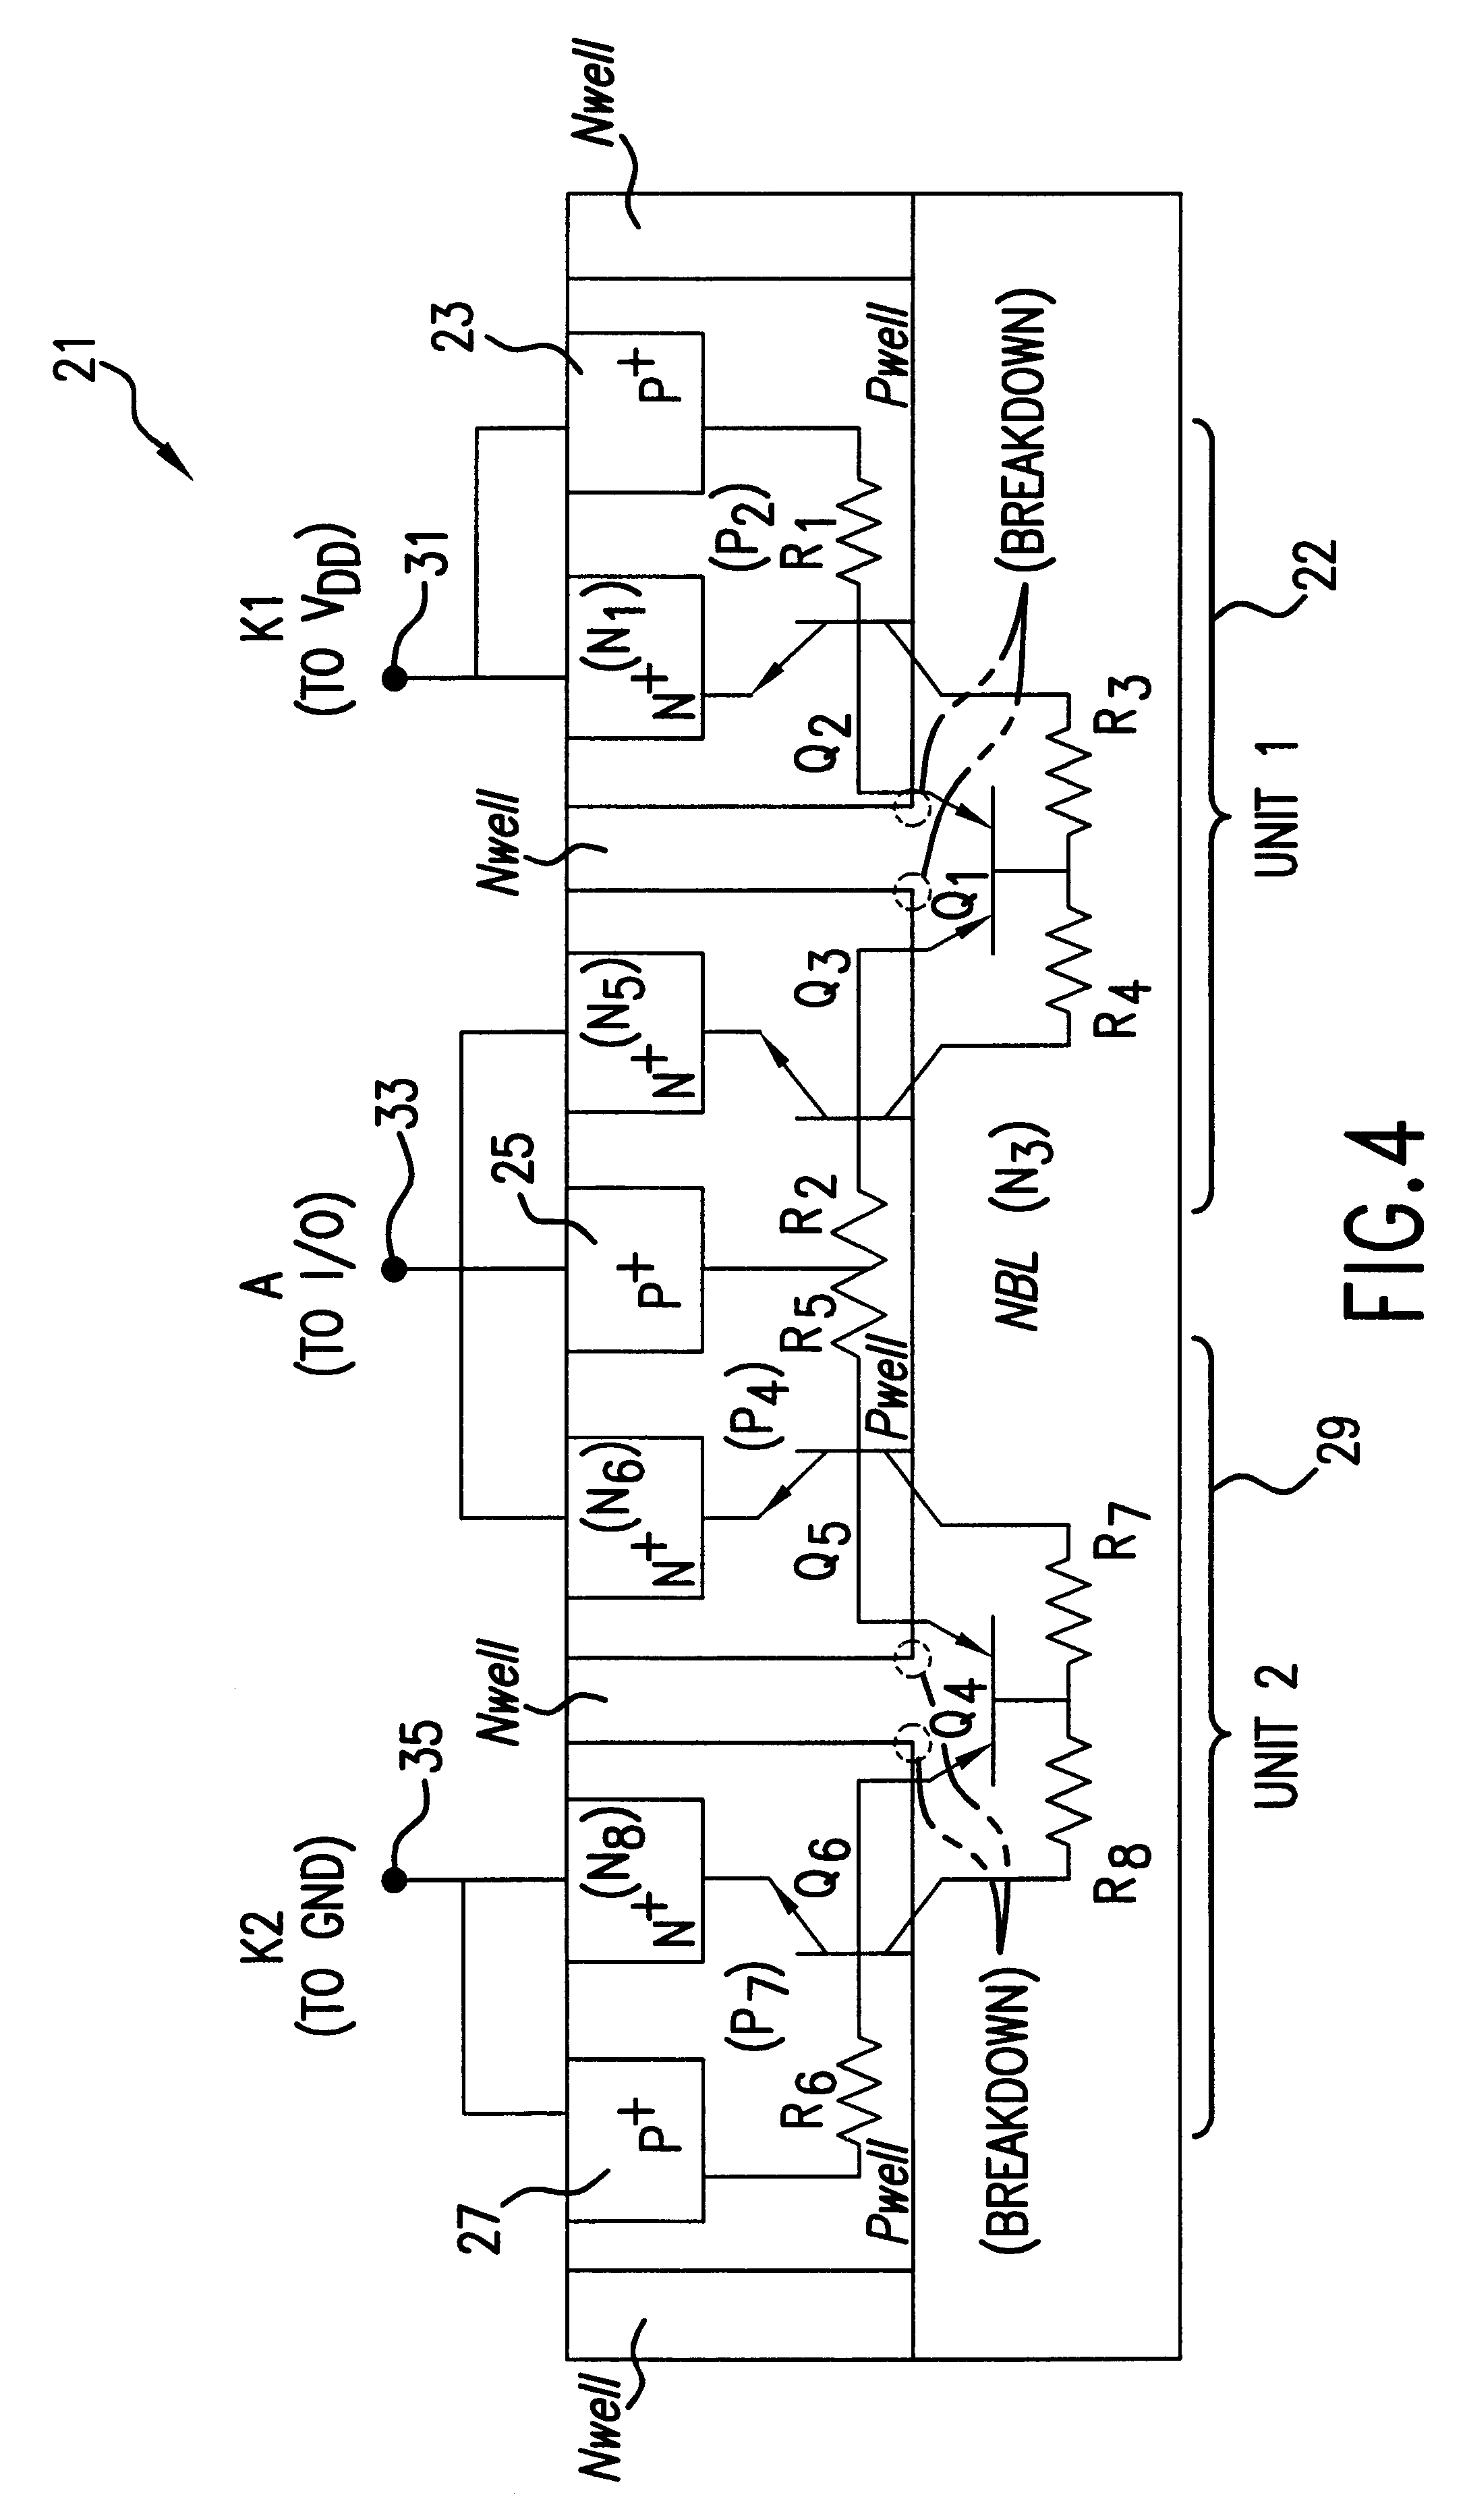 Single structure all-direction ESD protection for integrated circuits